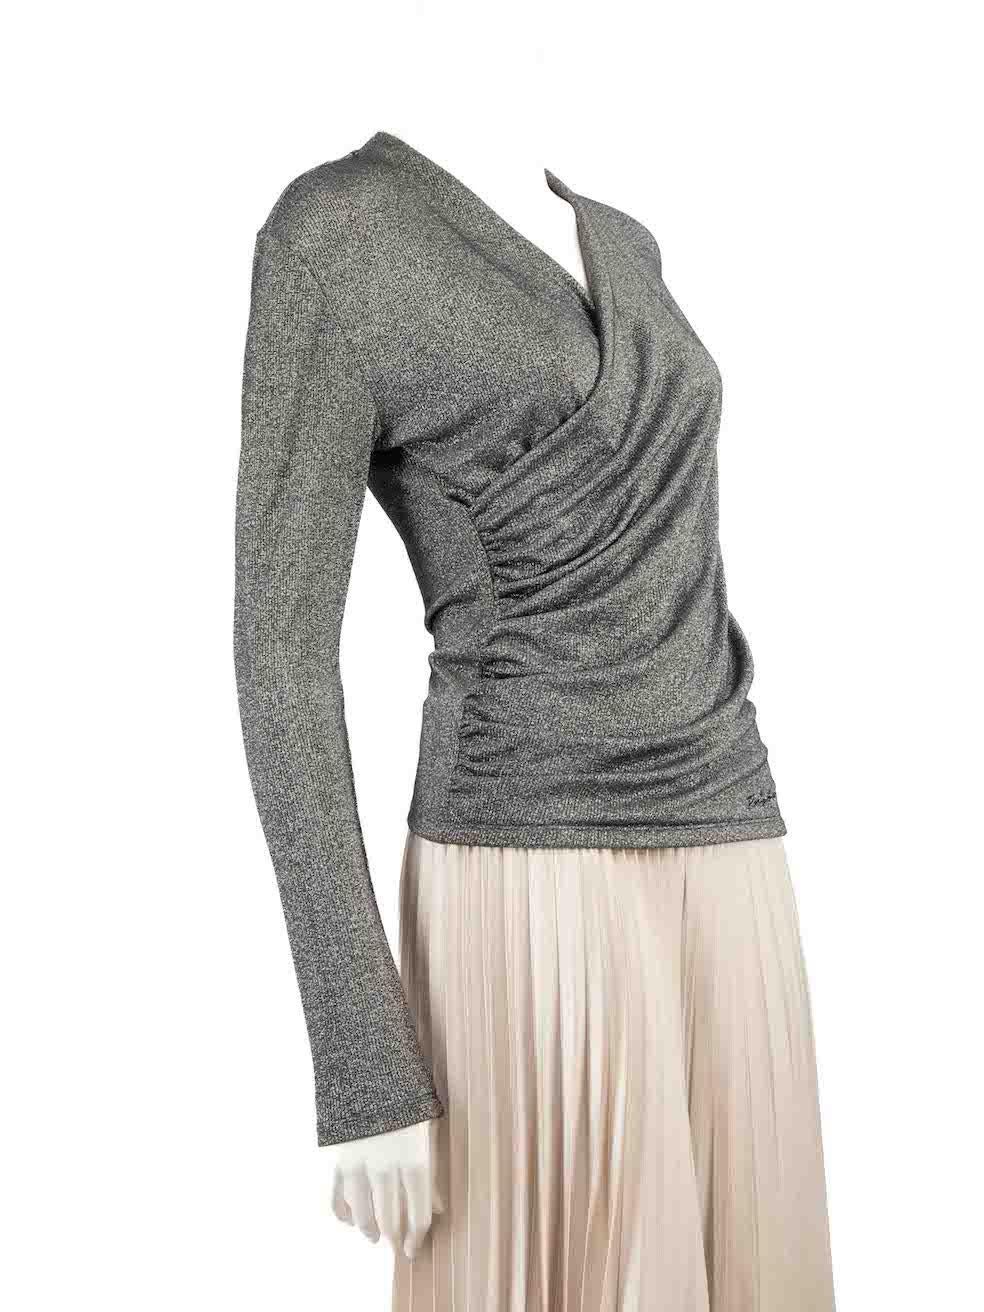 CONDITION is Very good. Hardly any visible wear to top is evident on this used Karl Lagerfeld designer resale item.
 
 
 
 Details
 
 
 Silver
 
 Viscose
 
 Top
 
 Metallic thread
 
 Figure hugging fit
 
 Plunge neck
 
 Ruched side detail
 
 Long